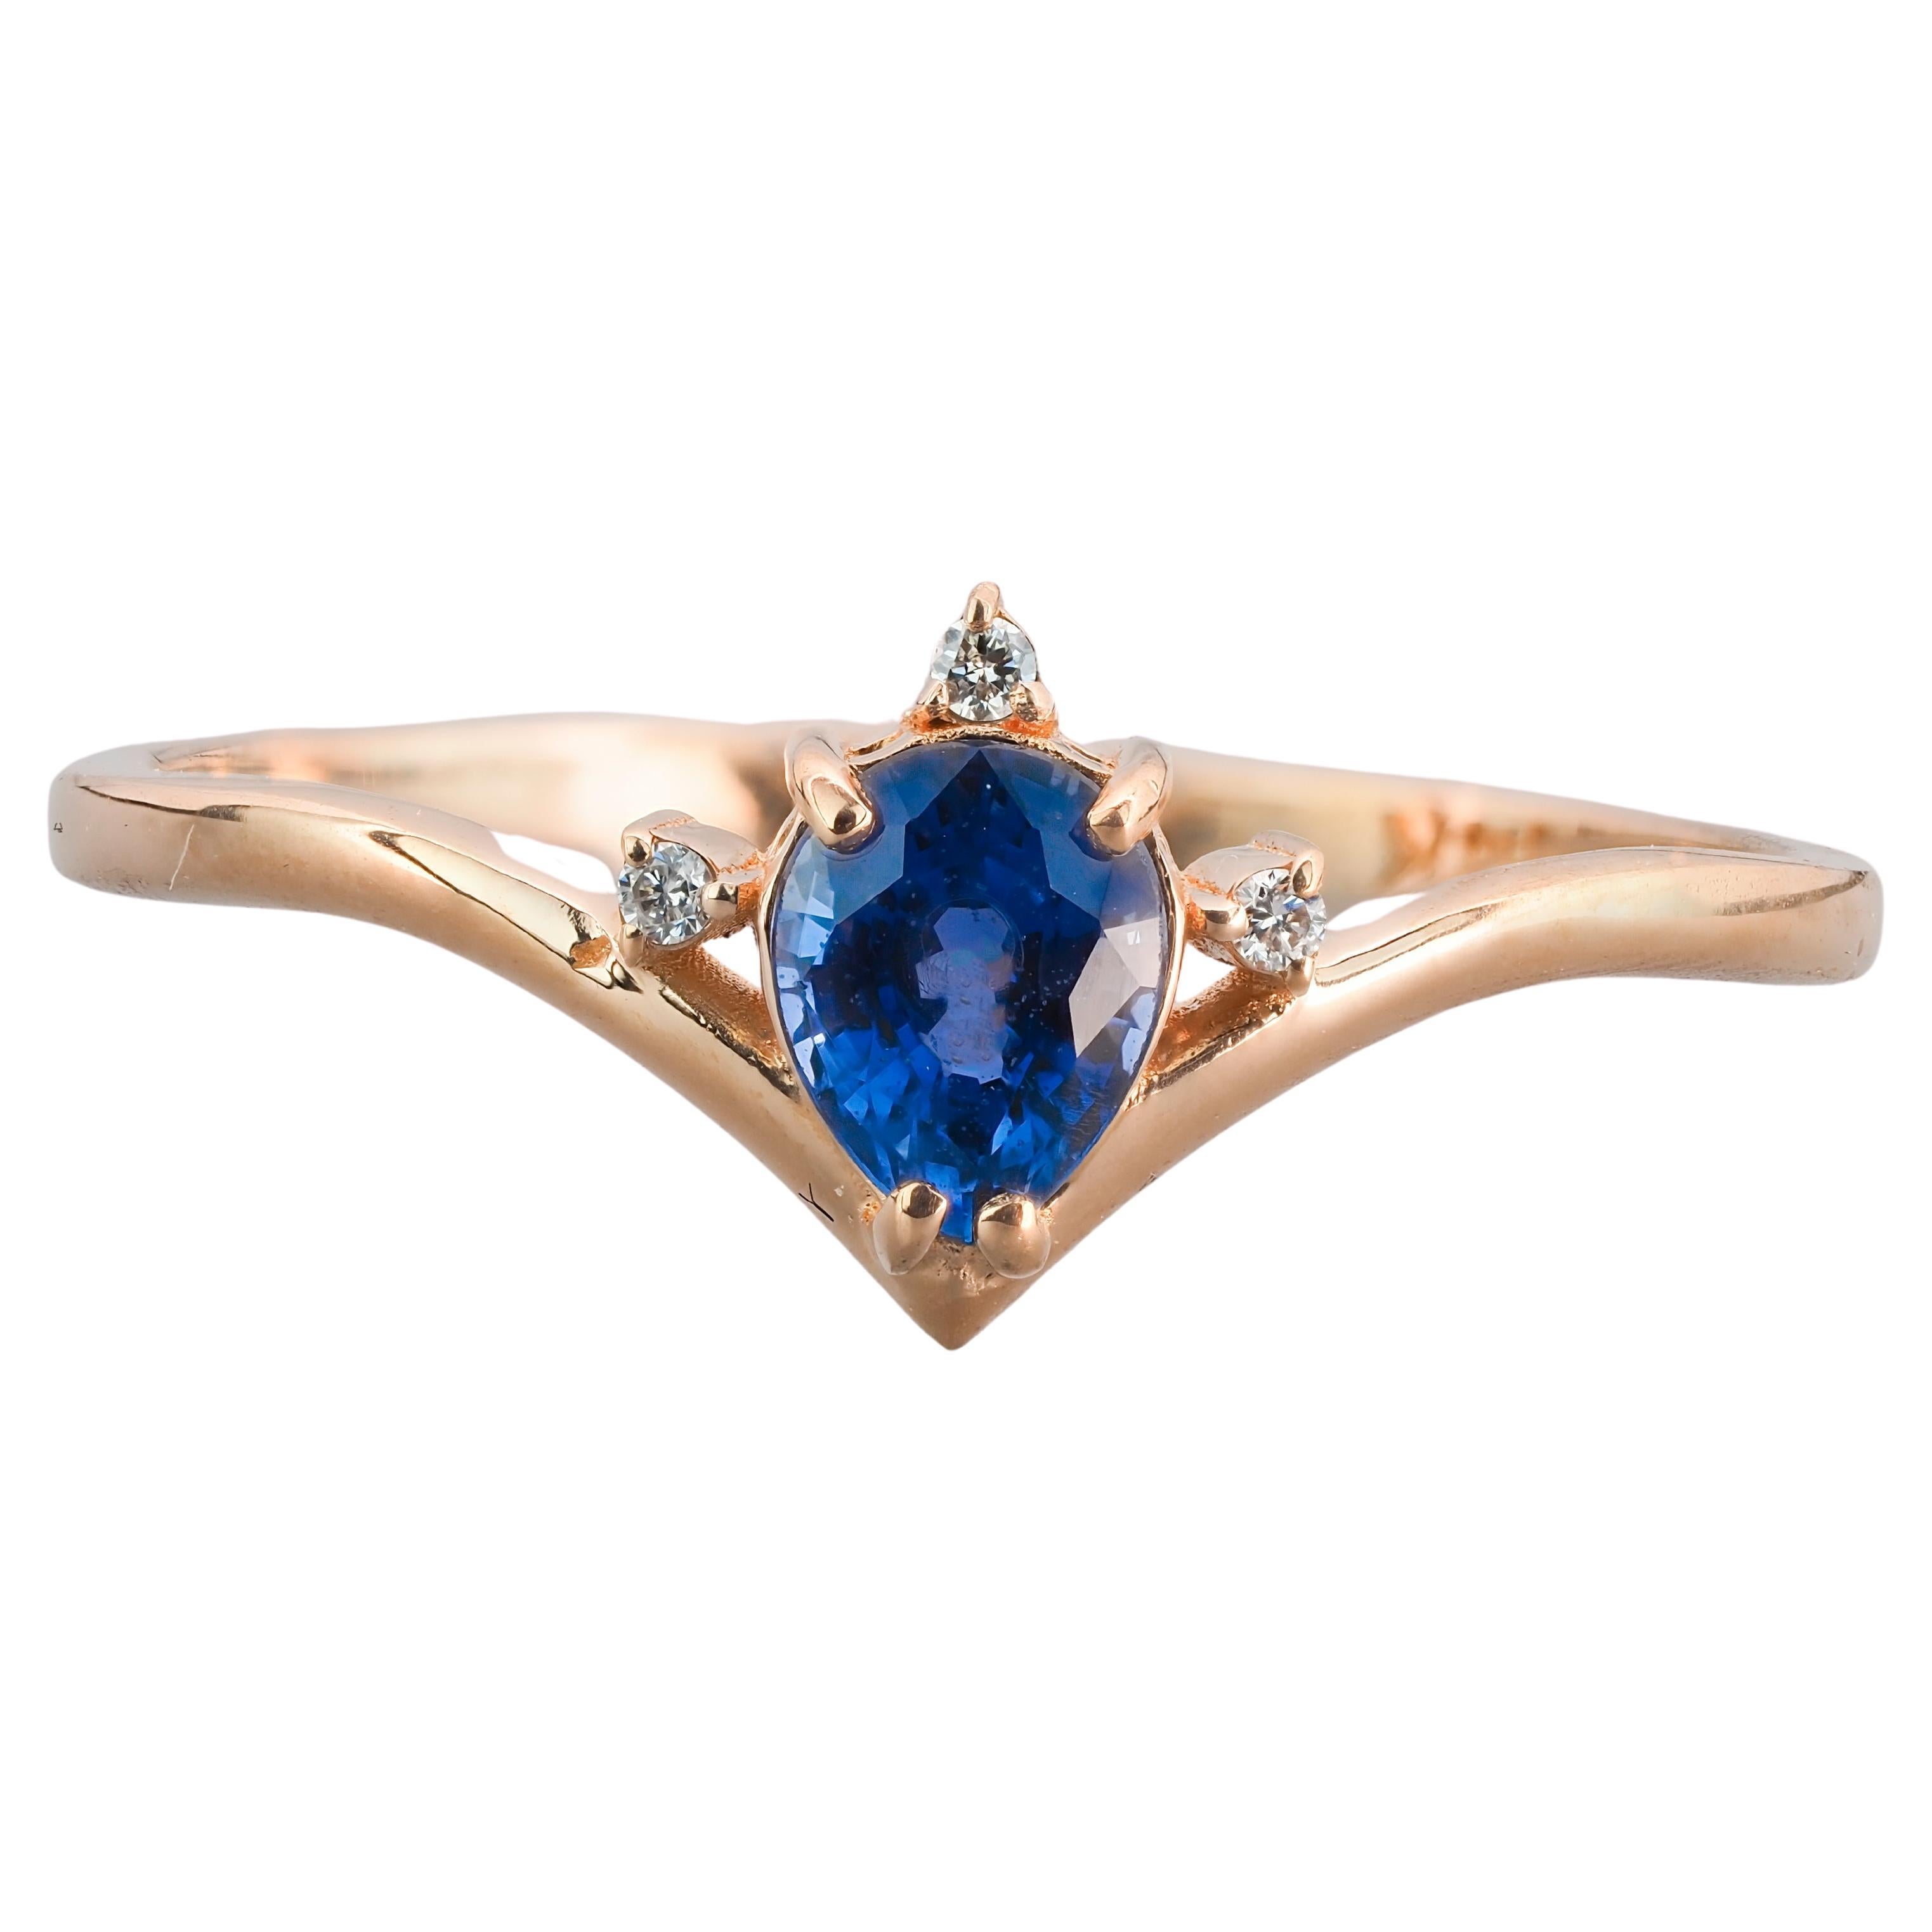 How much are blue sapphires worth?